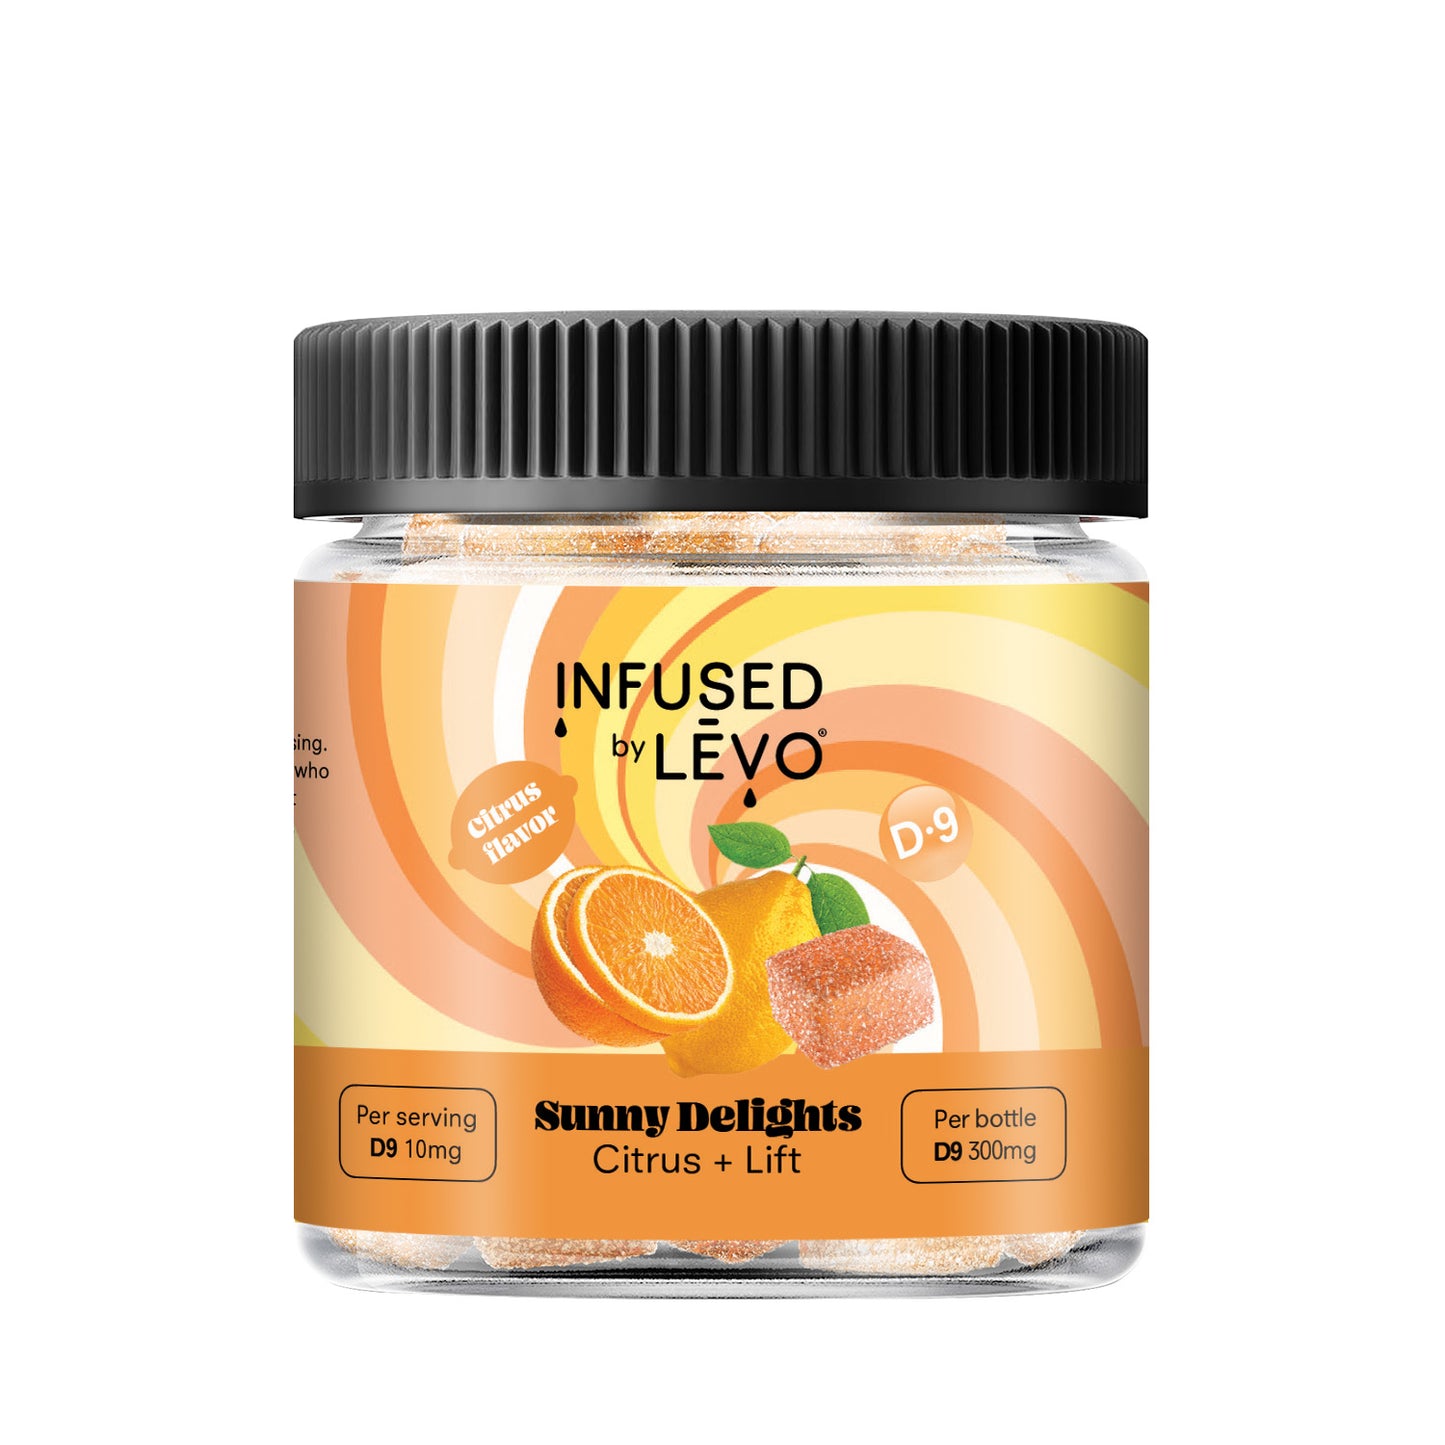 Infused by LEVO Sunny Delights Gummies with D-9. Closed bottle.